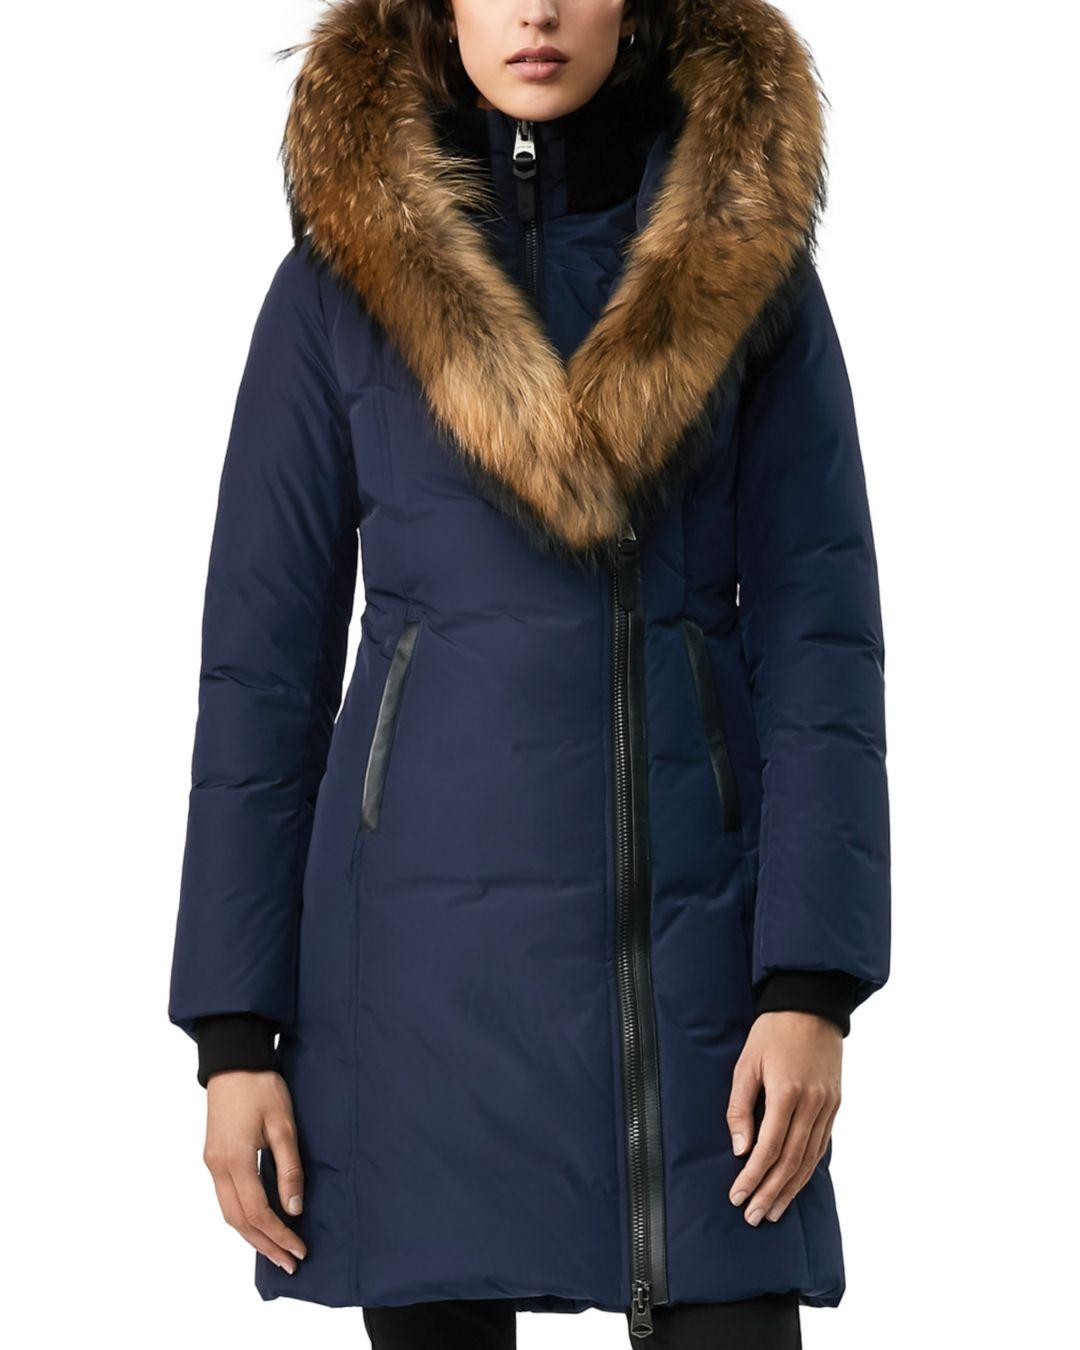 Mackage Kay Down Coat With Signature Natural Fur Collar In Navy - Women ...